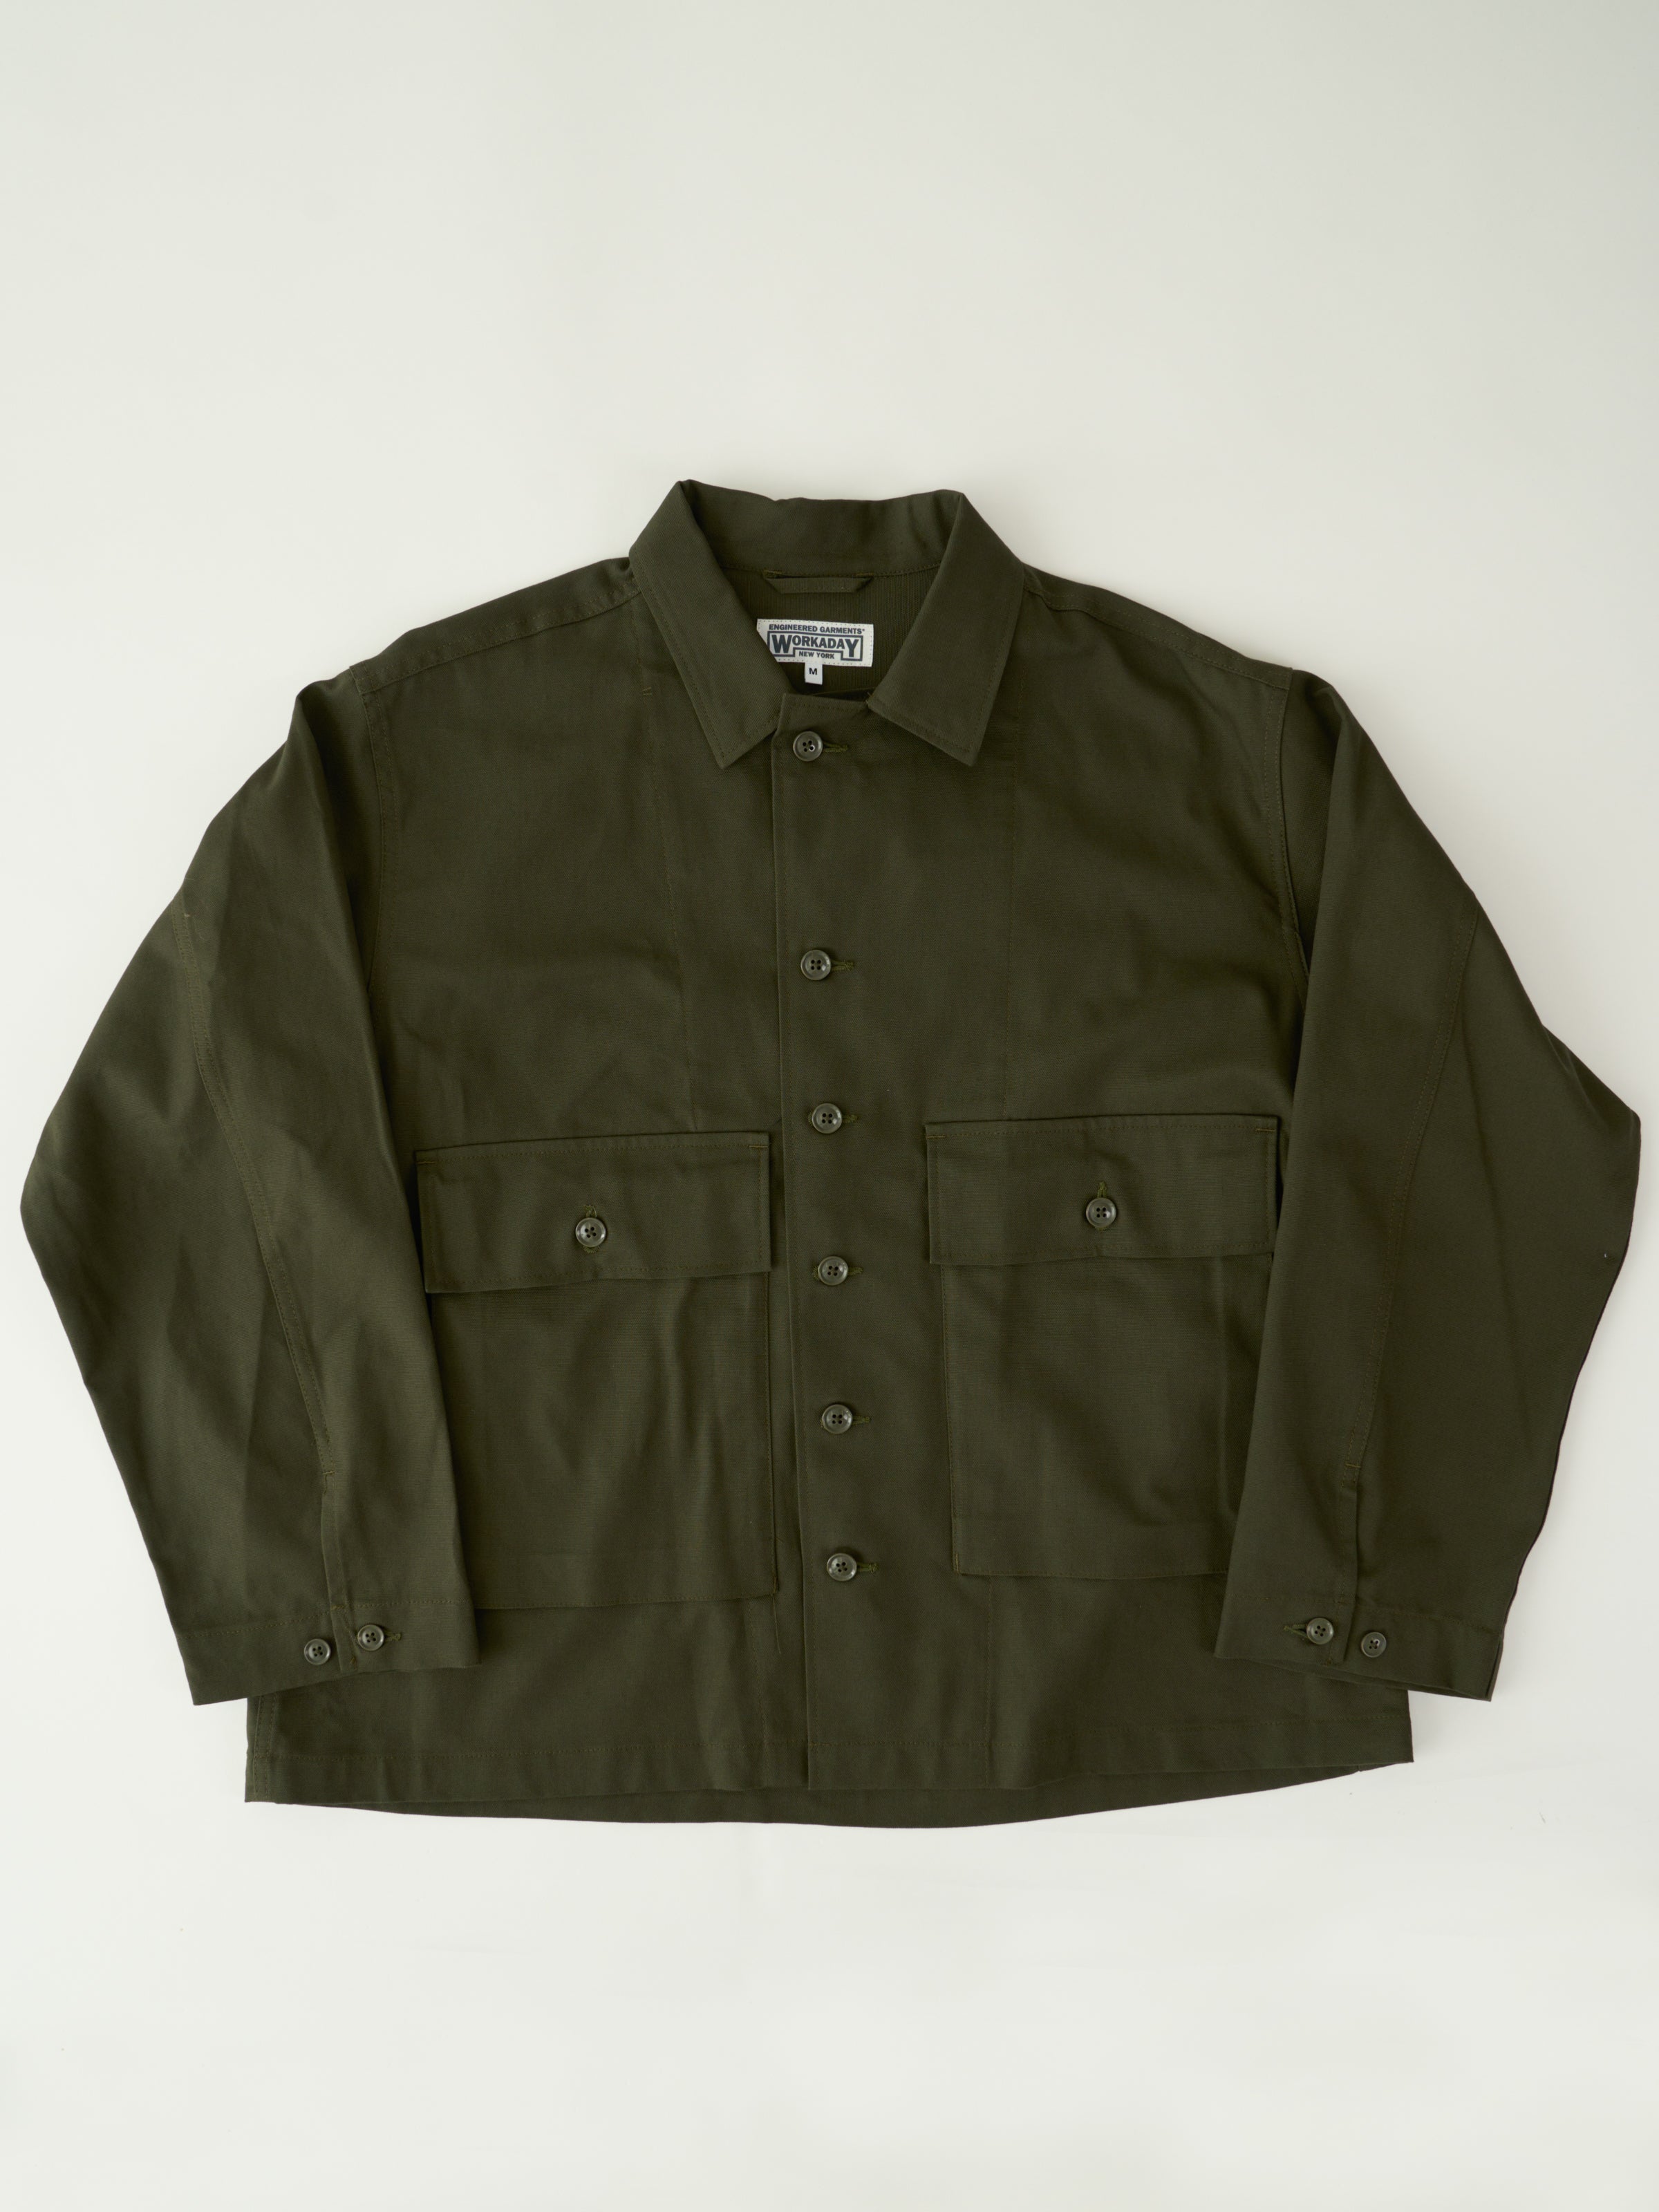 Sea Bees Jacket - Olive 7oz Cotton Duck